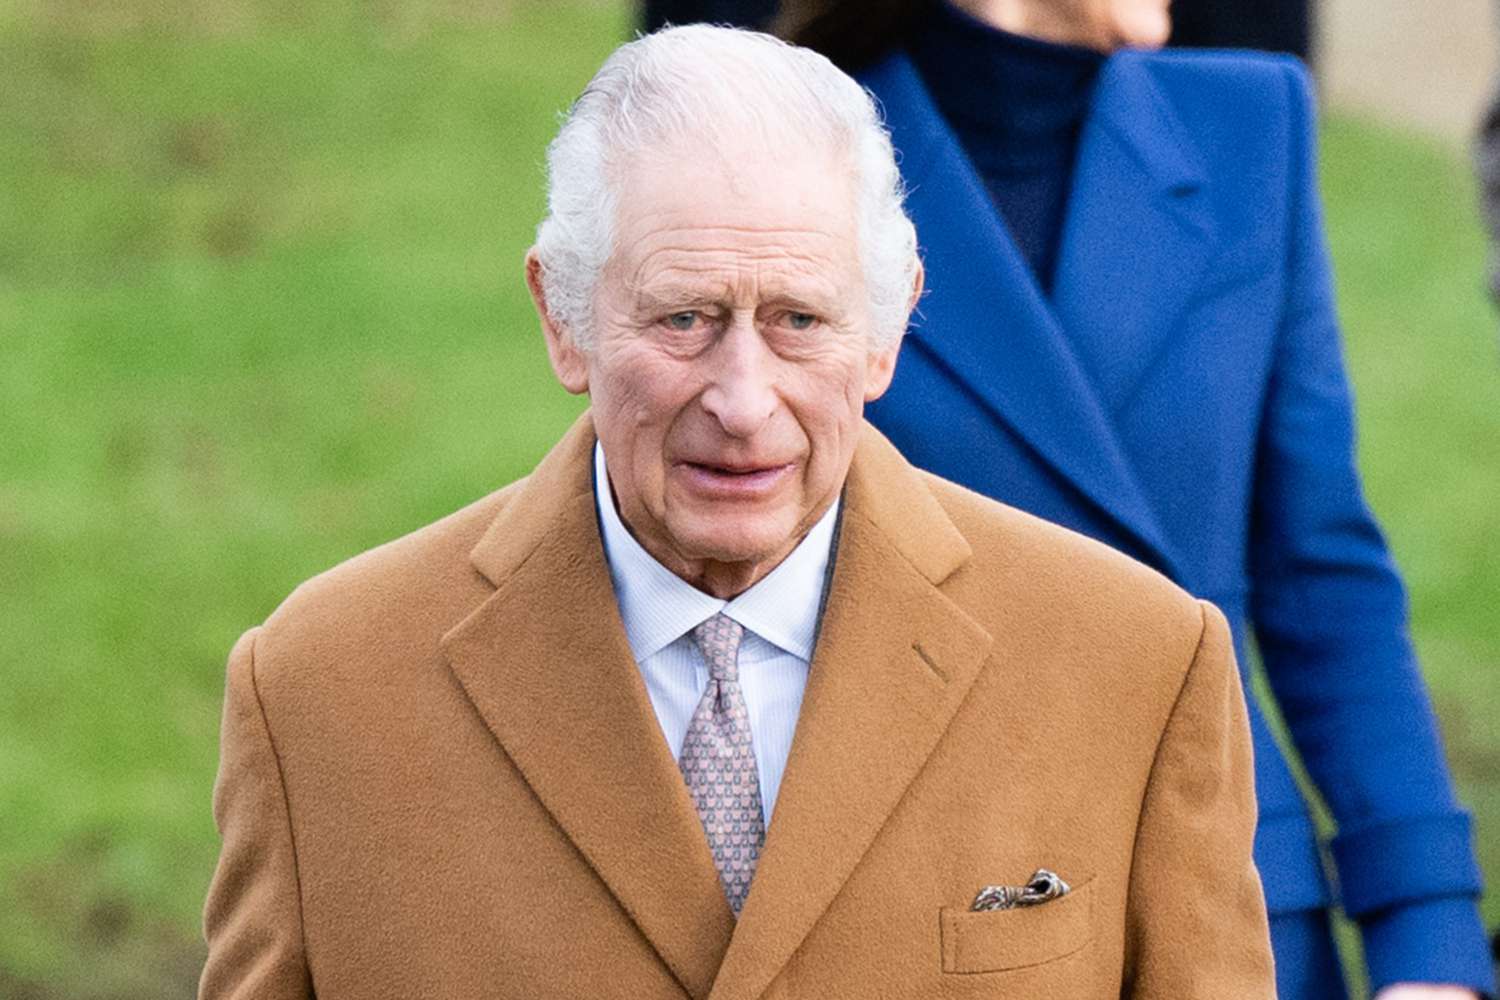 King Charles III Hospitalized In London For Enlarged Prostate: Royal Family Health Update